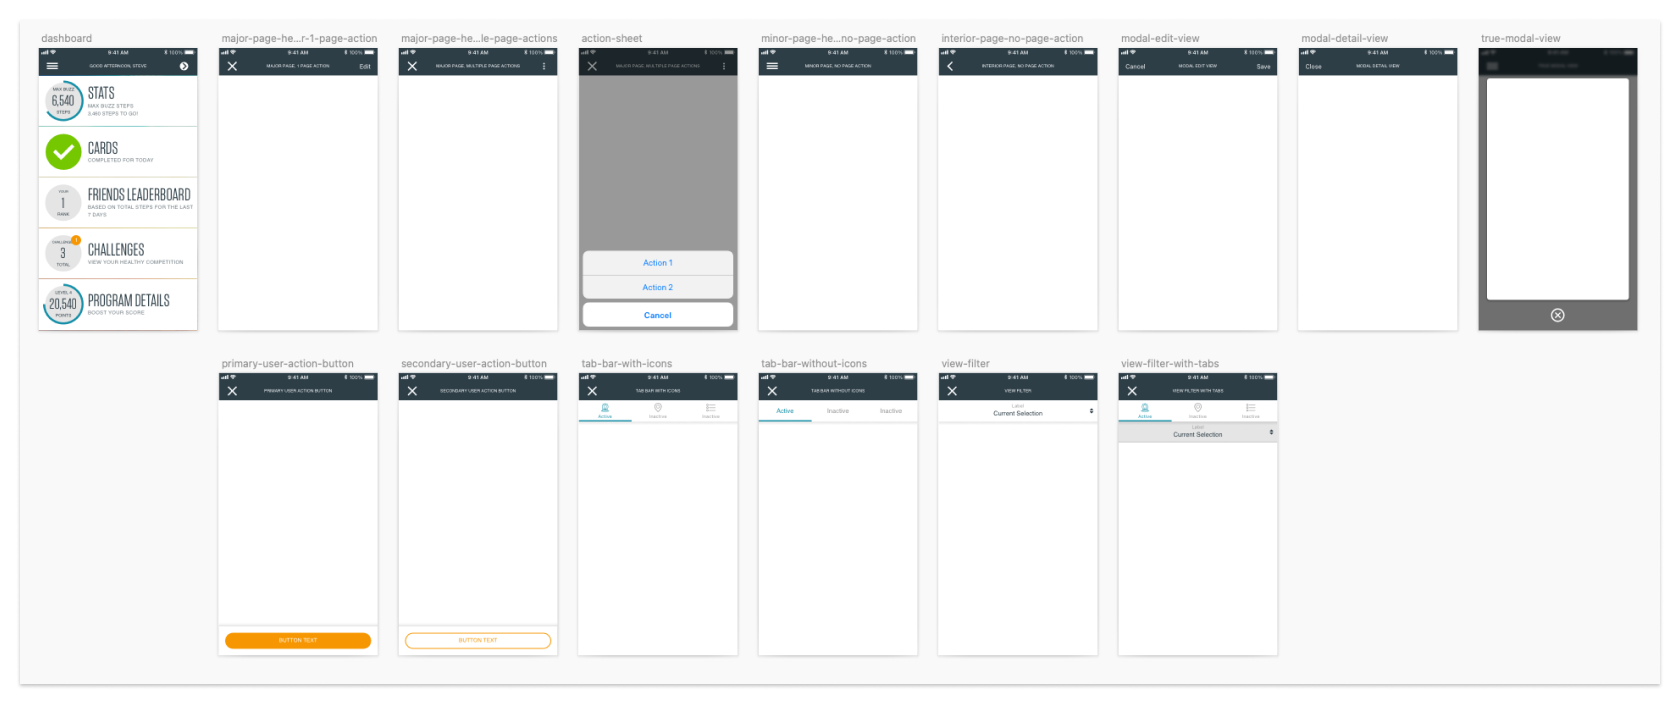 A set of screens built to demonstrate consistent usage of proper platform interaction patterns for common design flow problems.